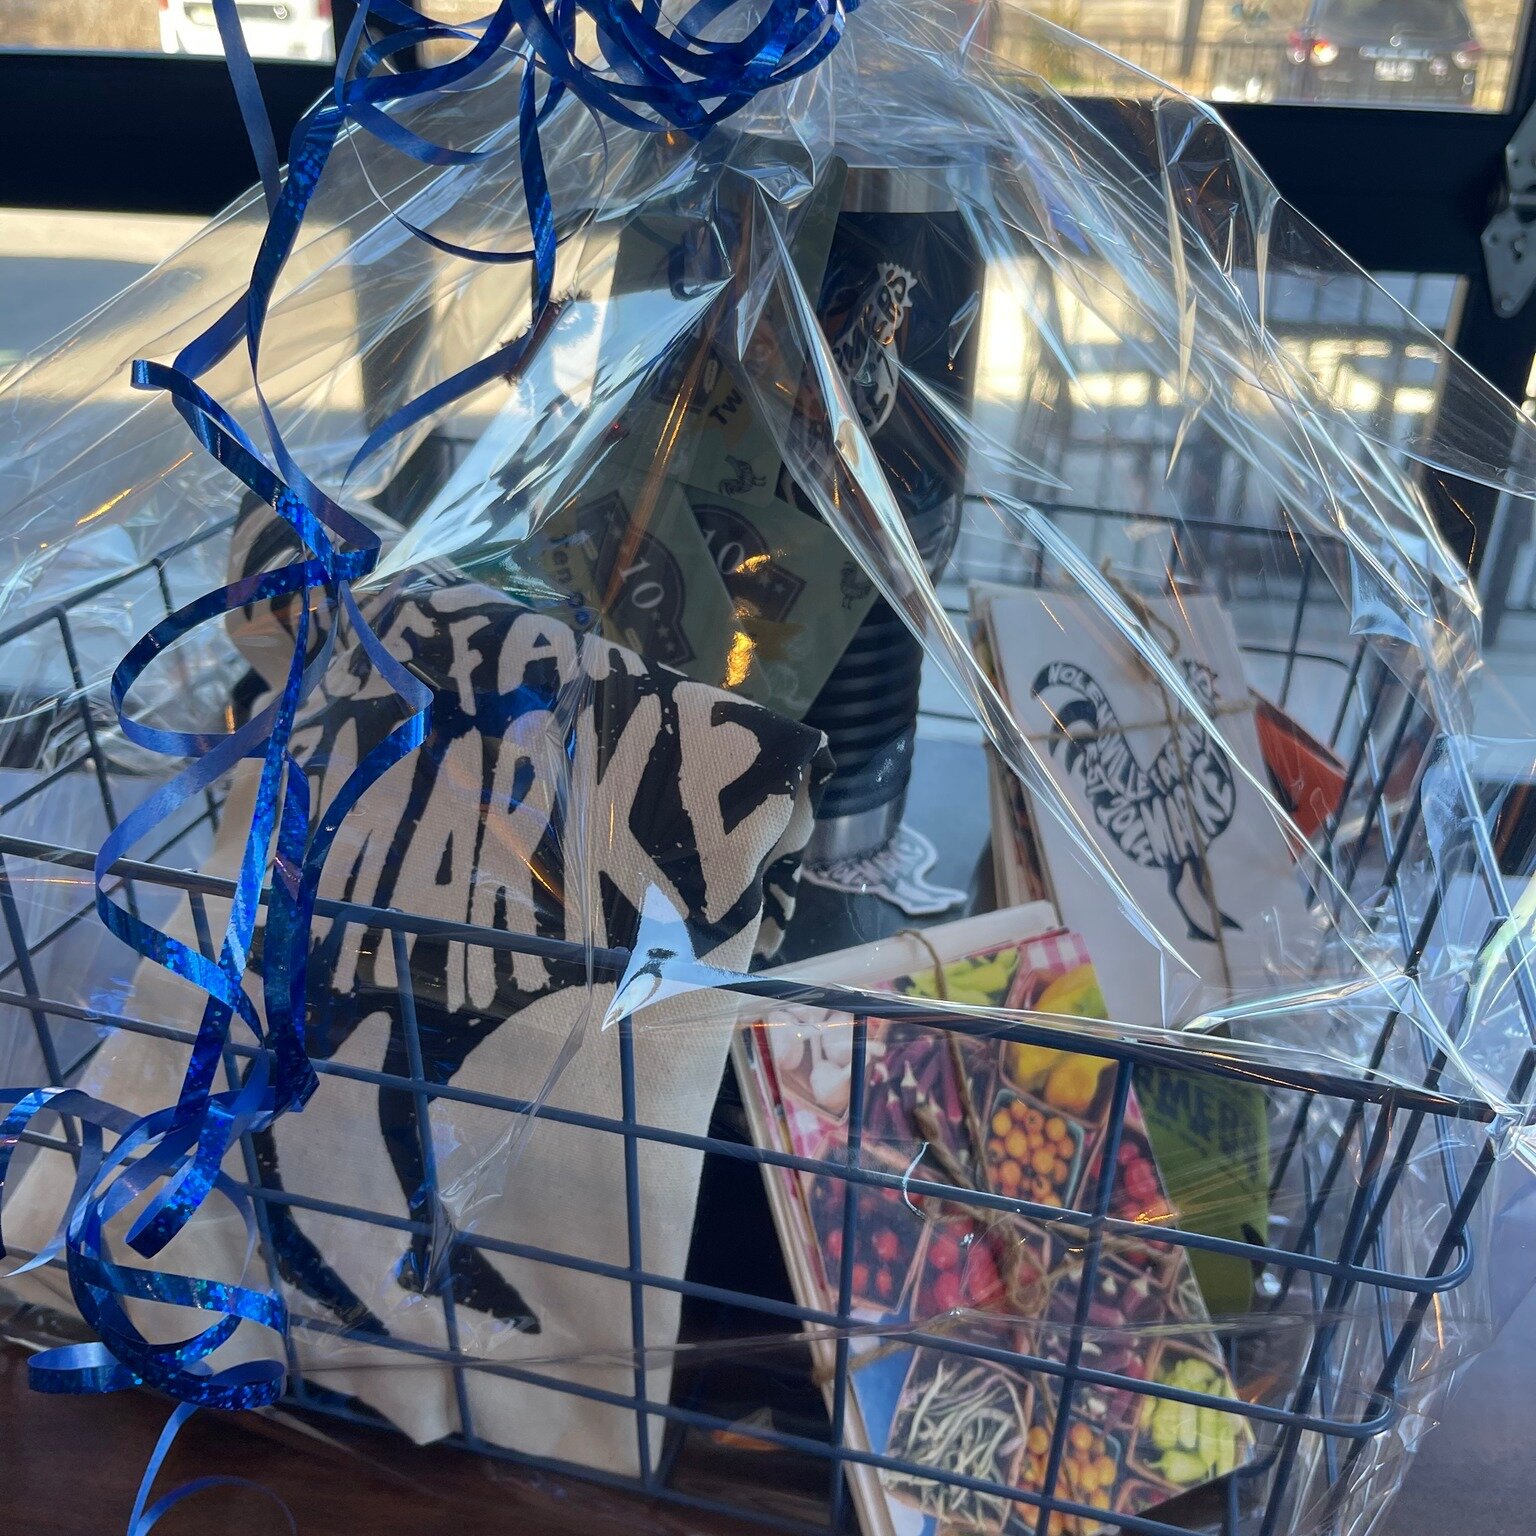 Thinking about lunch today? Stop by Taziki's Mediterranean Cafe today and enter to win our basket giveaway! Enter by donating to our Programming funds which helps to operate our Kids POP Club, Double SNAP and Feed Your Neighbor programs!

#nolensvill